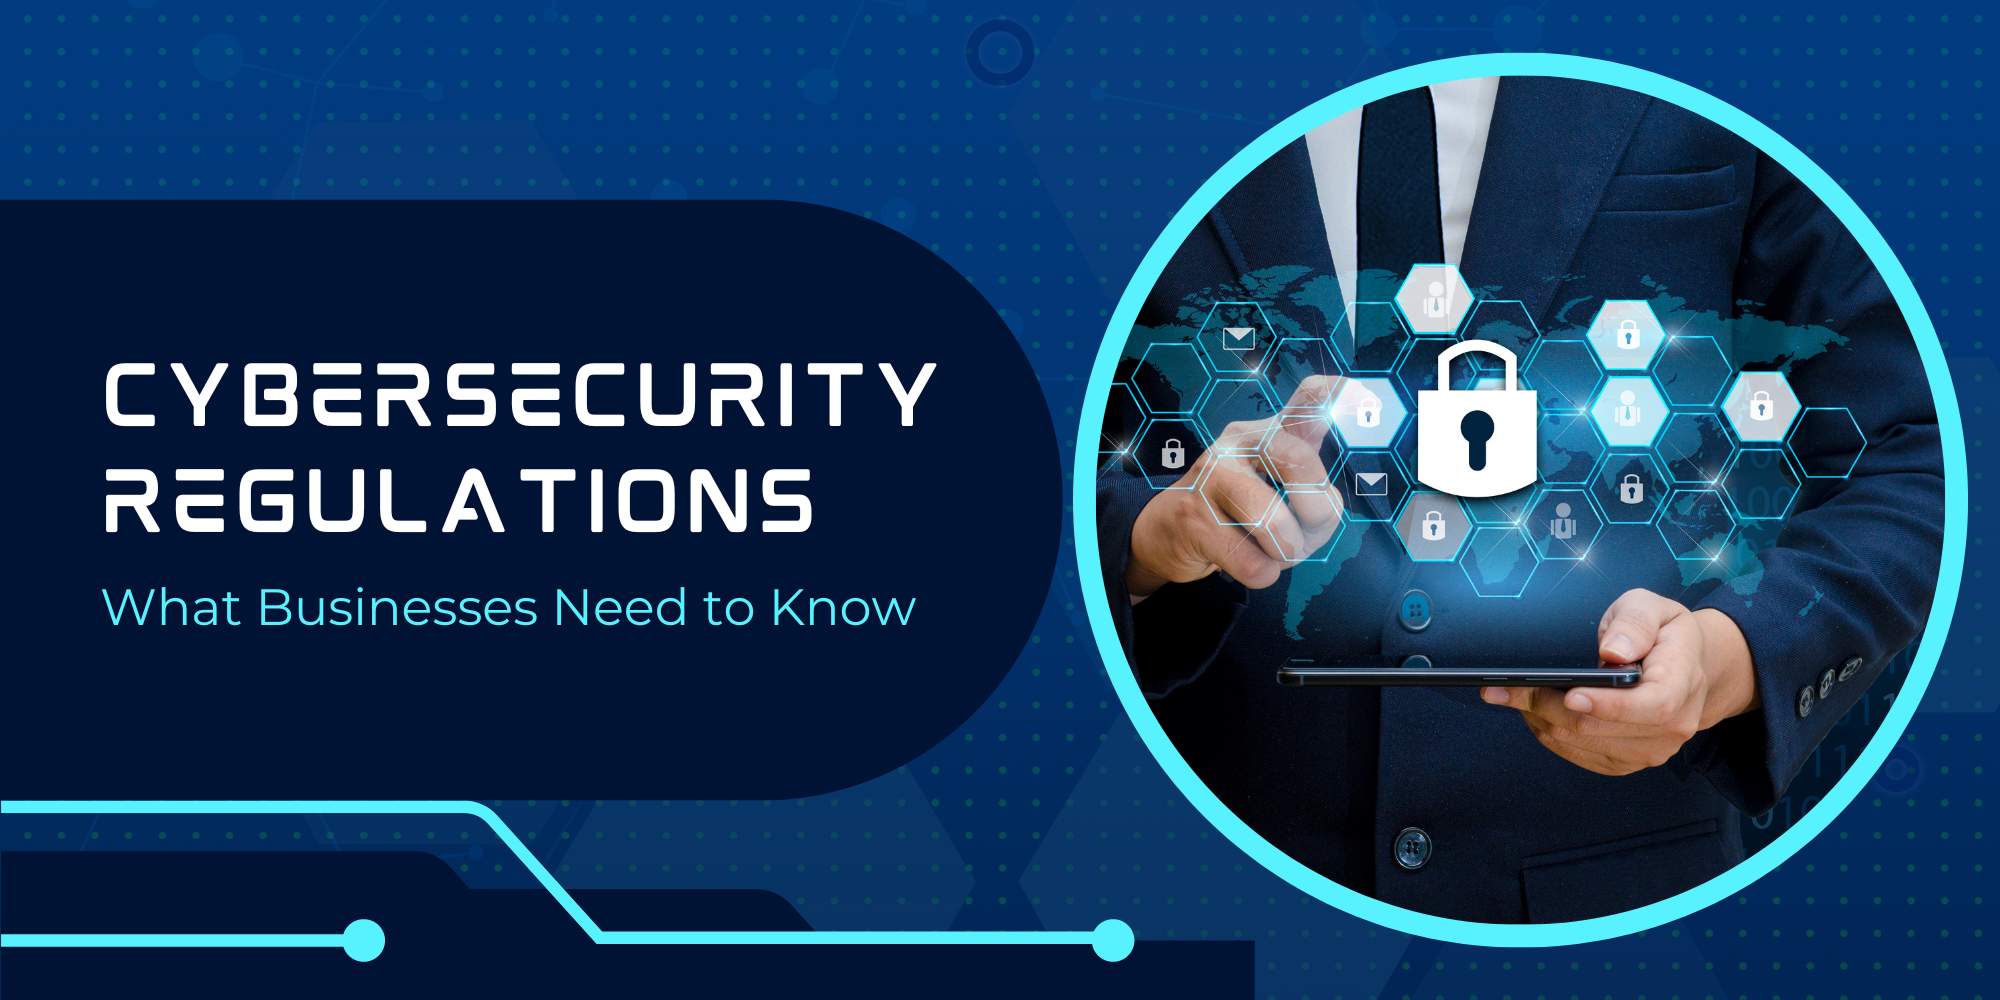 Cybersecurity Regulations - What Businesses Need to Know